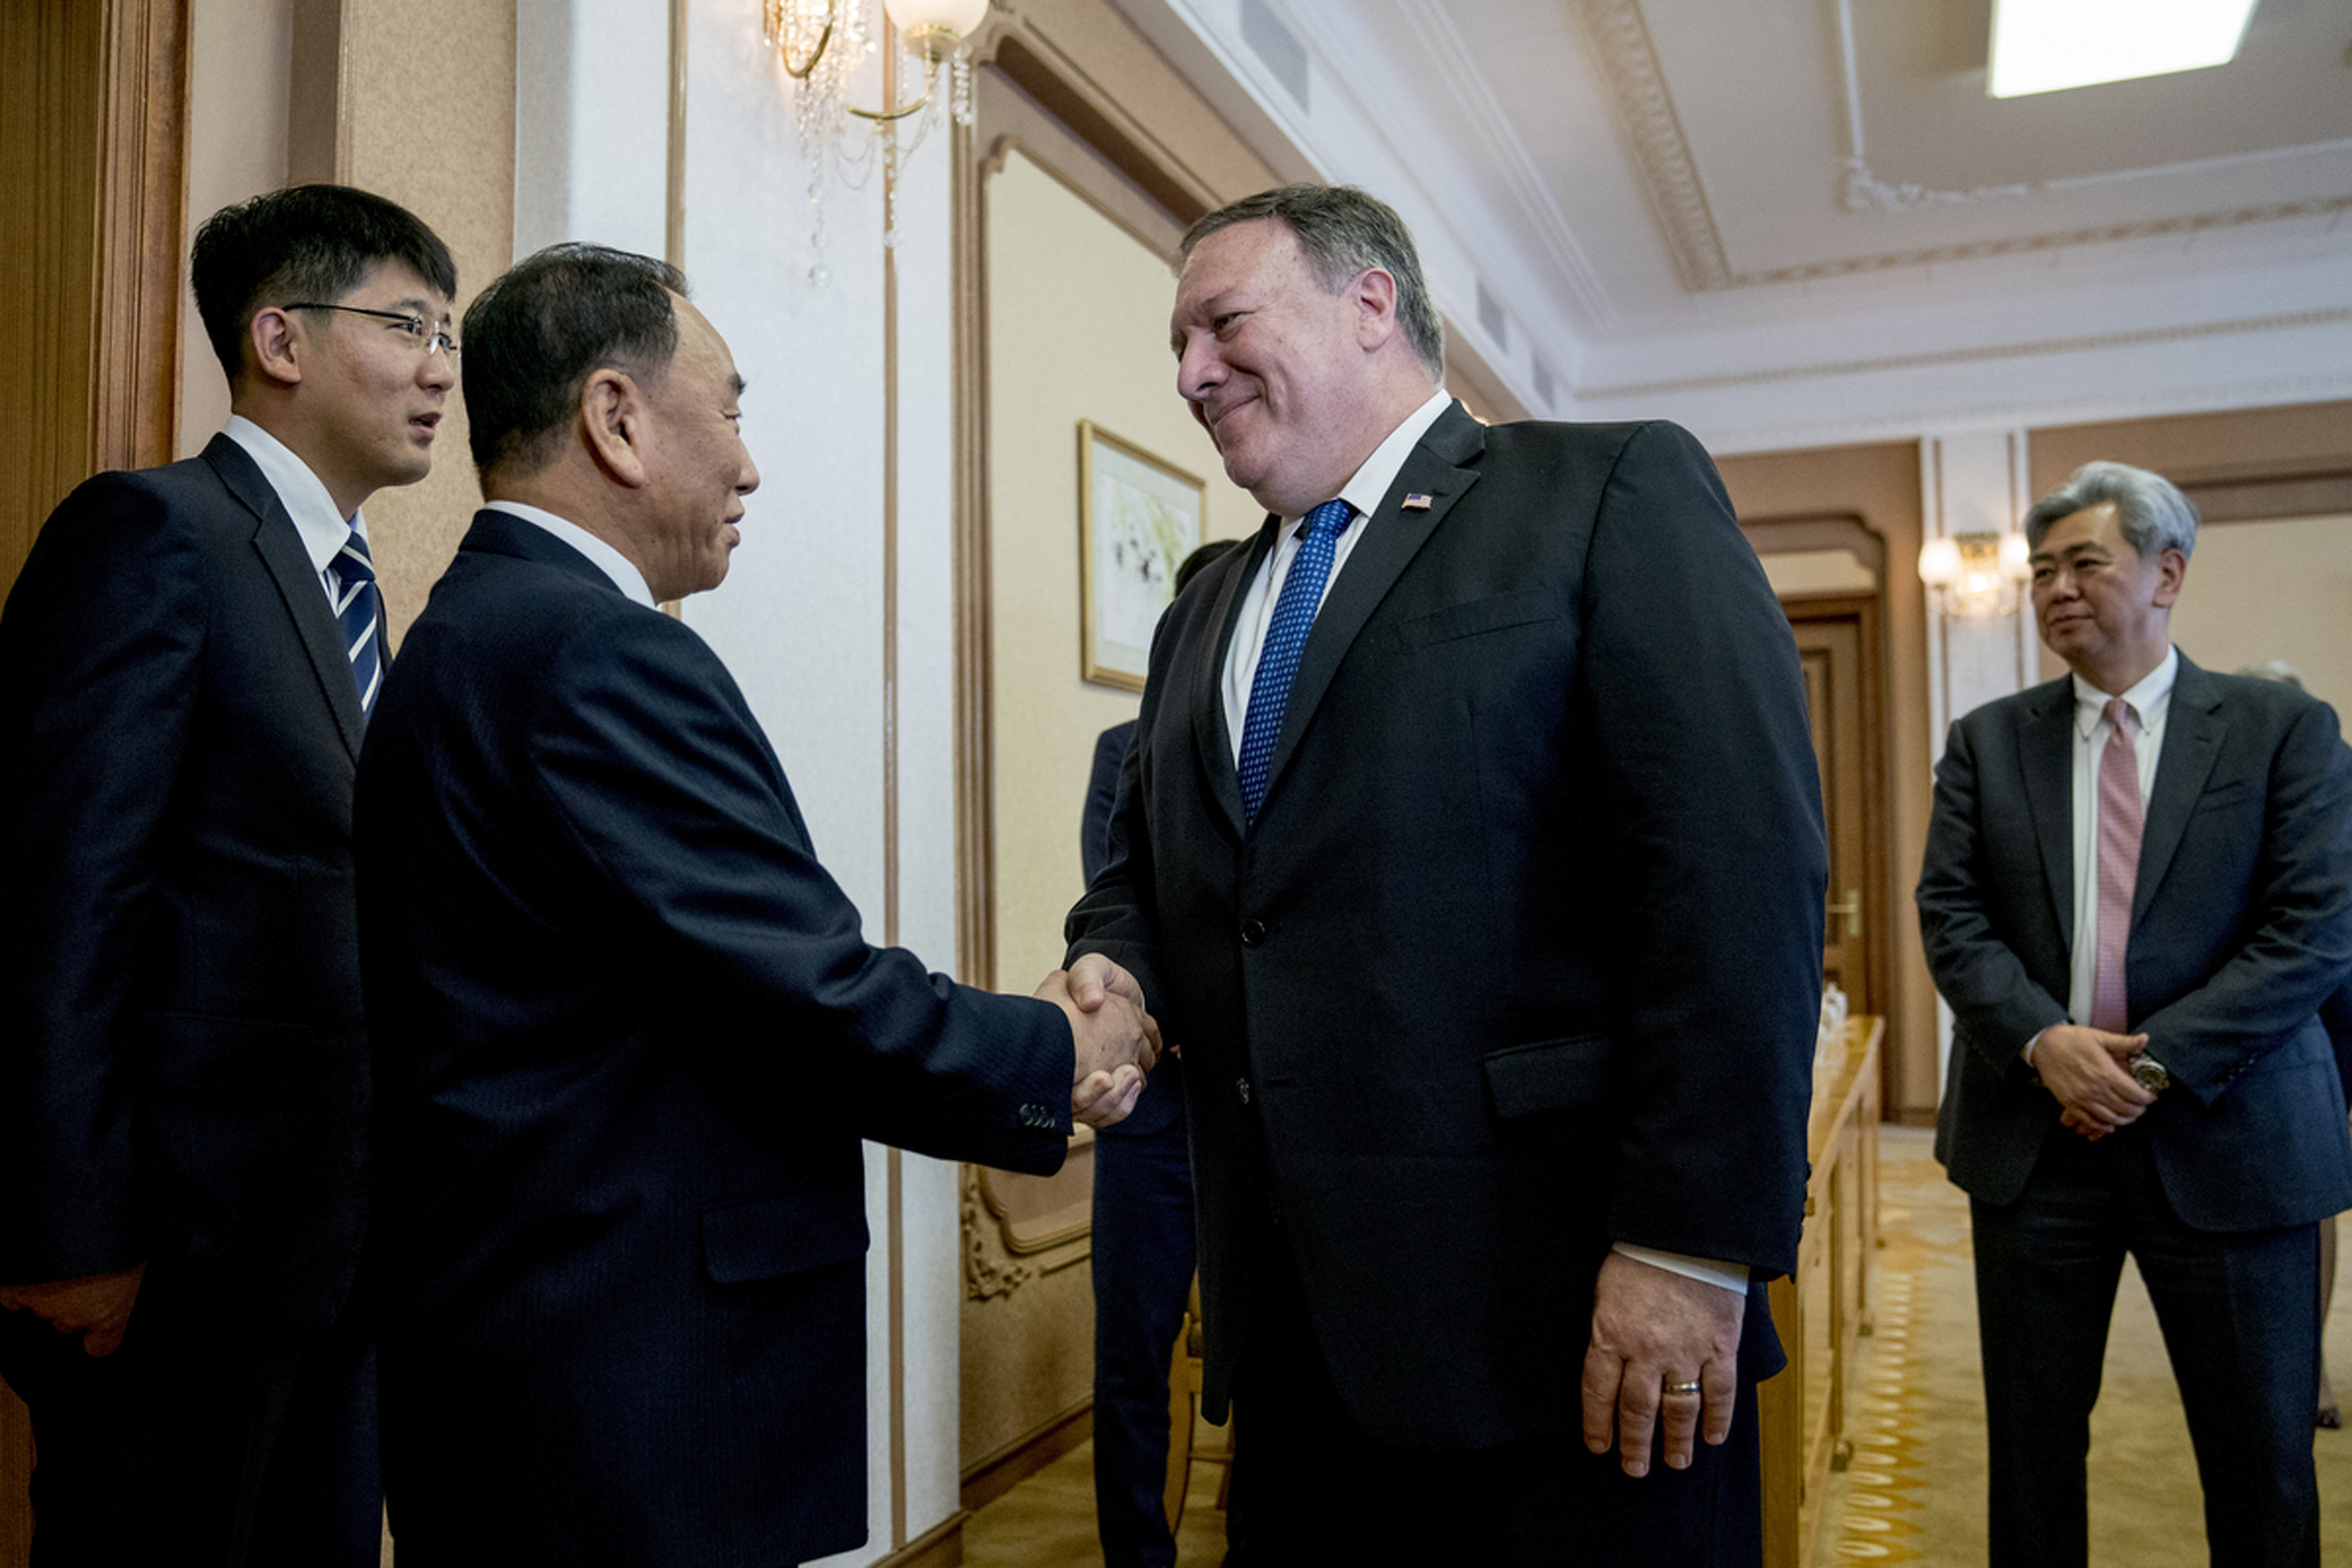 Secretary of State Mike Pompeo greets North Korea's director of the United Front Department, Kim Yong Chol (2nd L) at the Park Hwa Guest House in Pyongyang, North Korea on July 6, 2018. (Andrew Harnik—AFP/Getty Images)